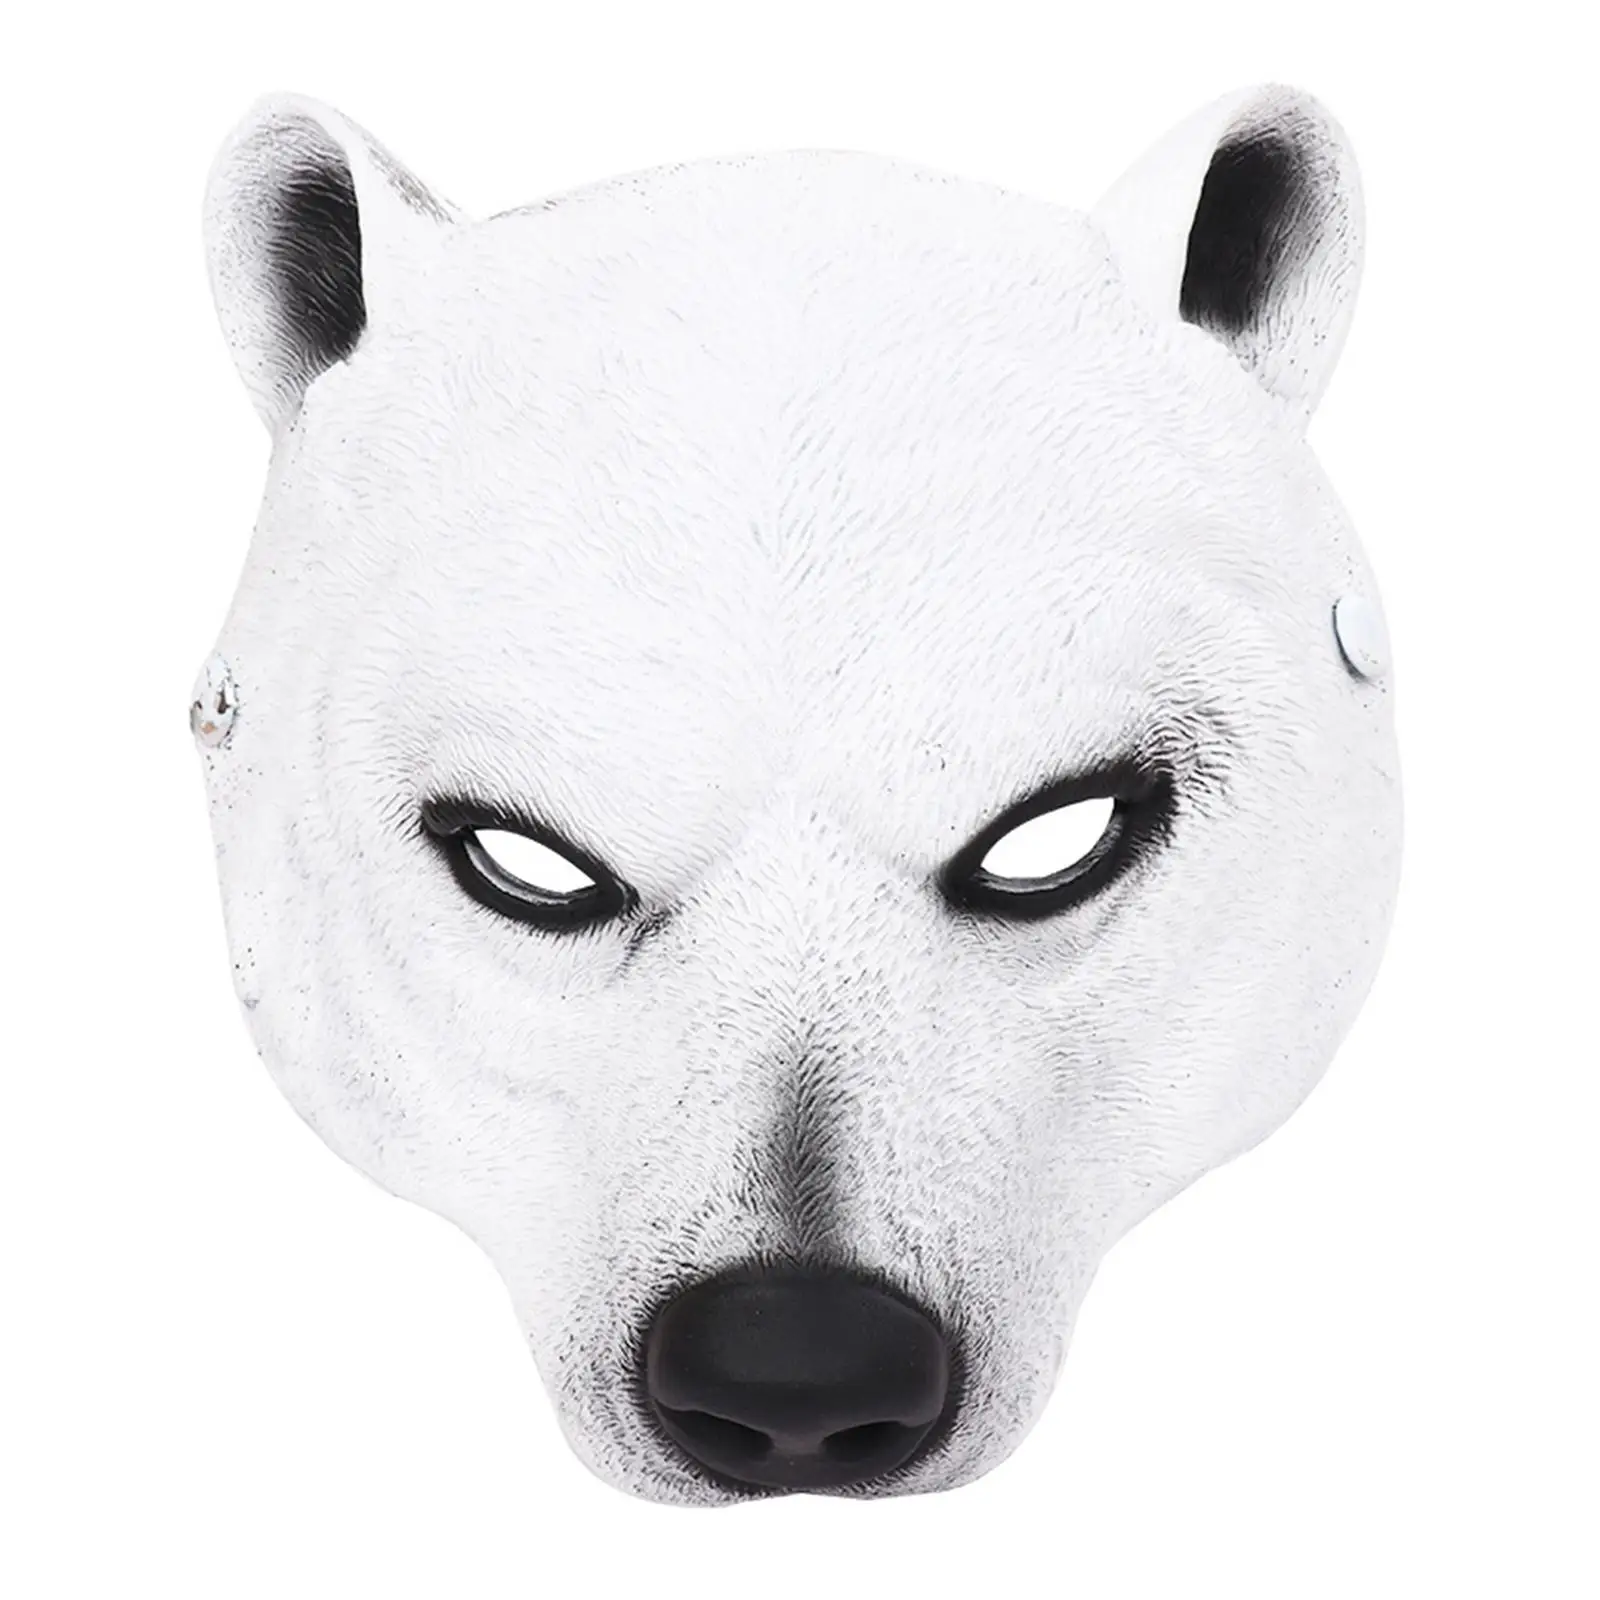 3D Halloween Polar Bear Mask Realistic Facial Cover Half Face Mask for Festival Costume Party Props Carnival Stage Performance